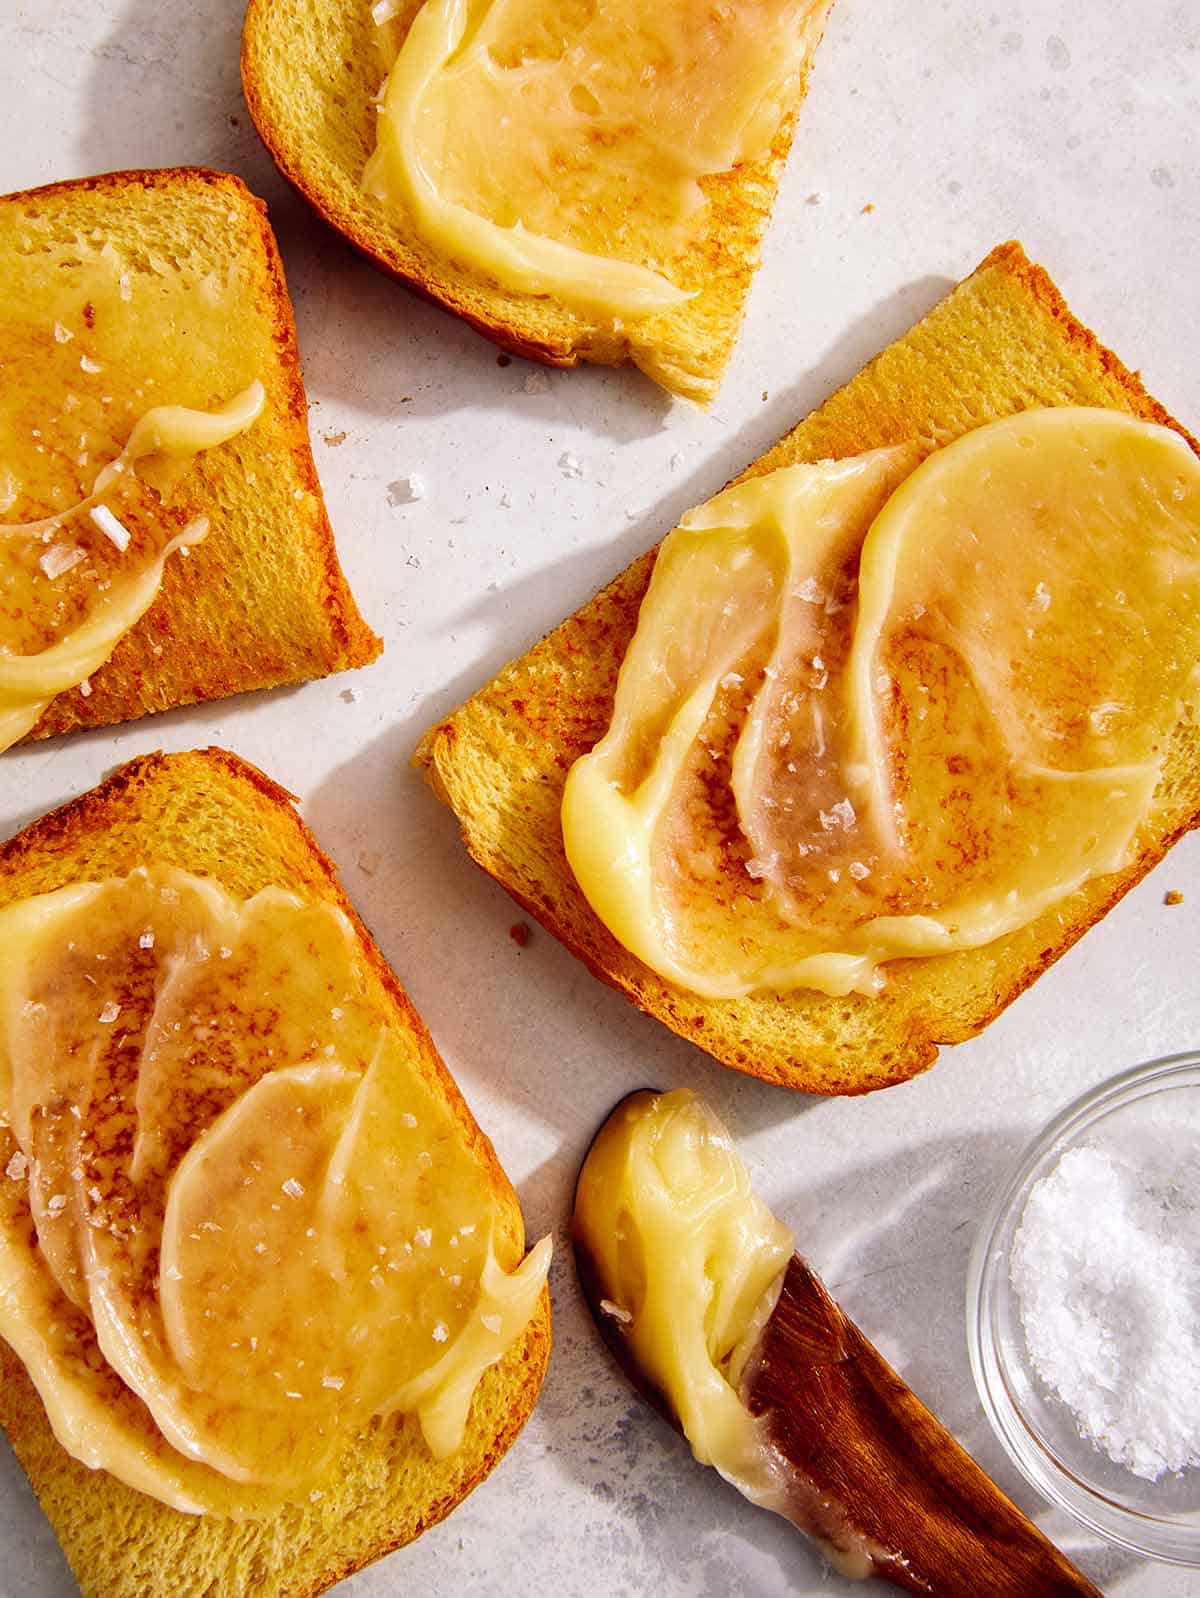 Honey butter smeared on toast. 